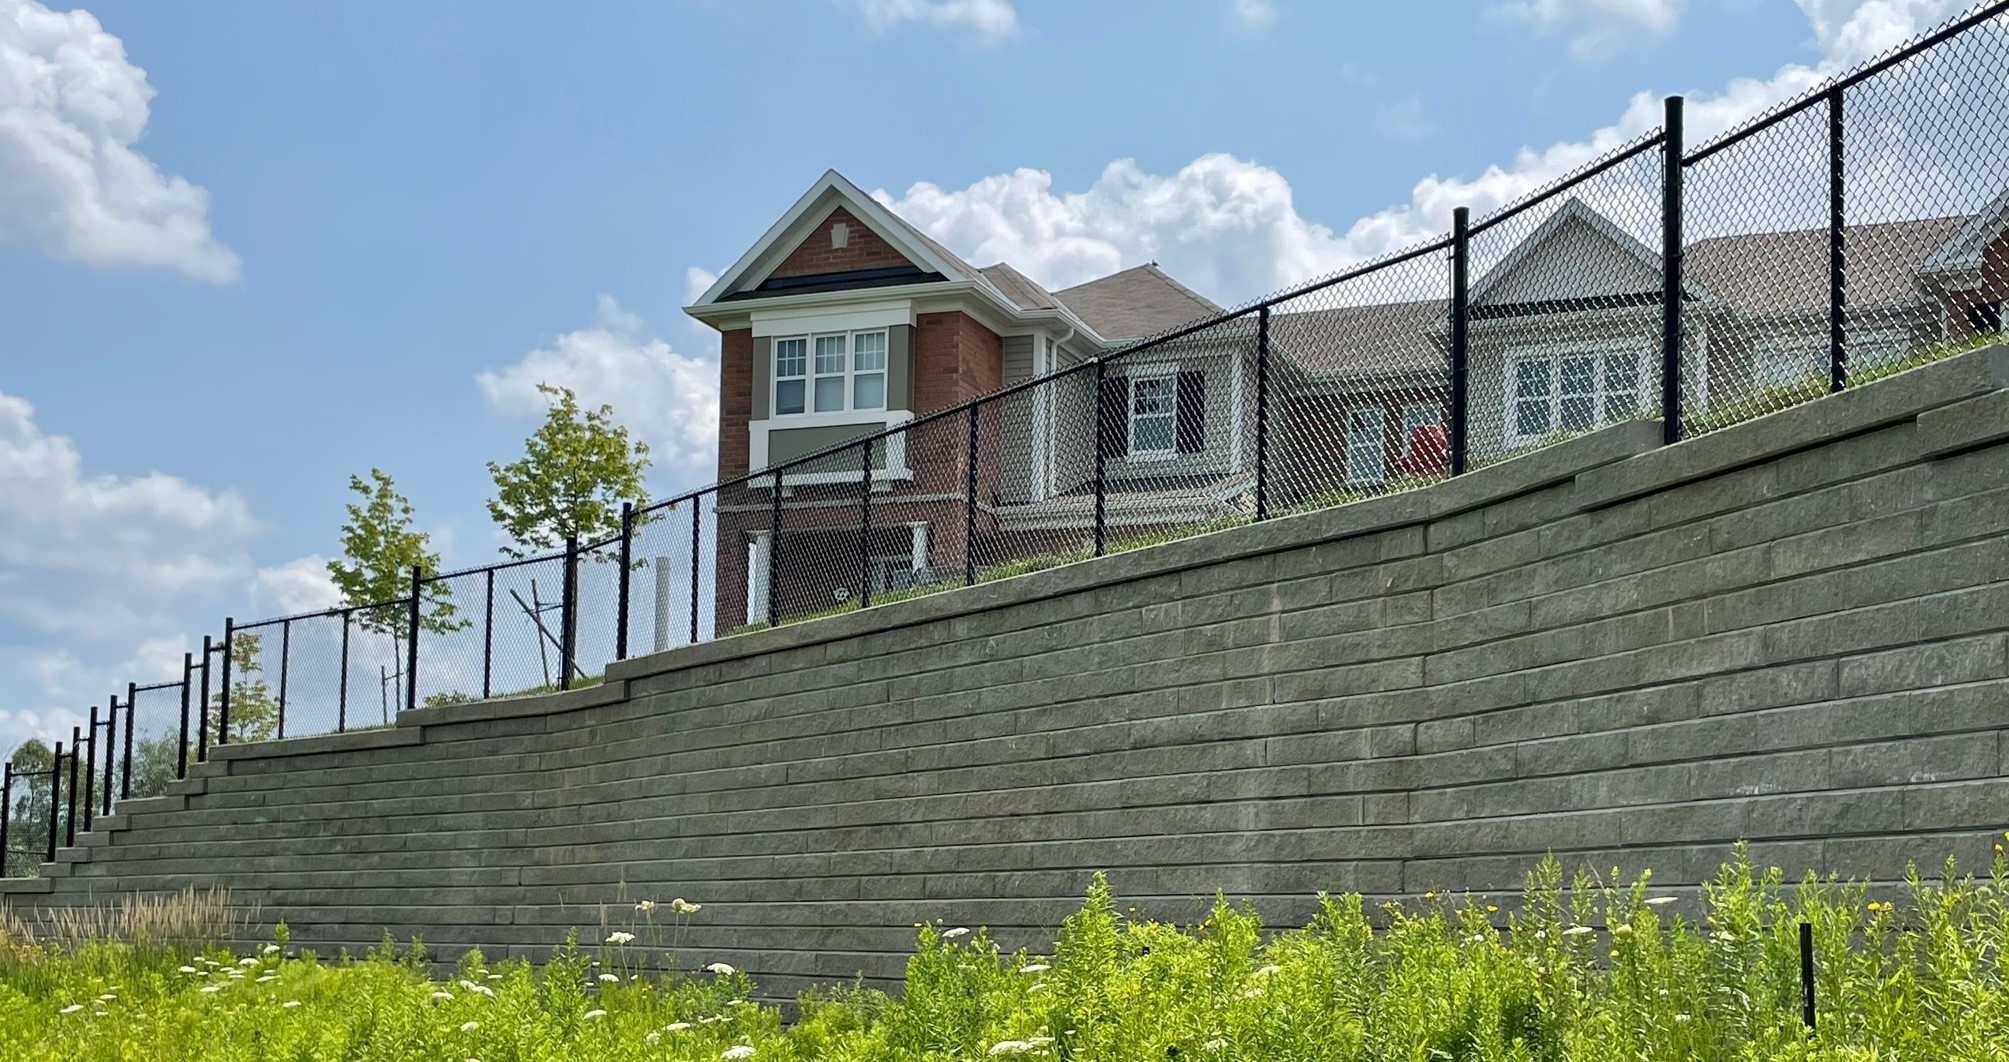 Retaining wall built around homes with fence